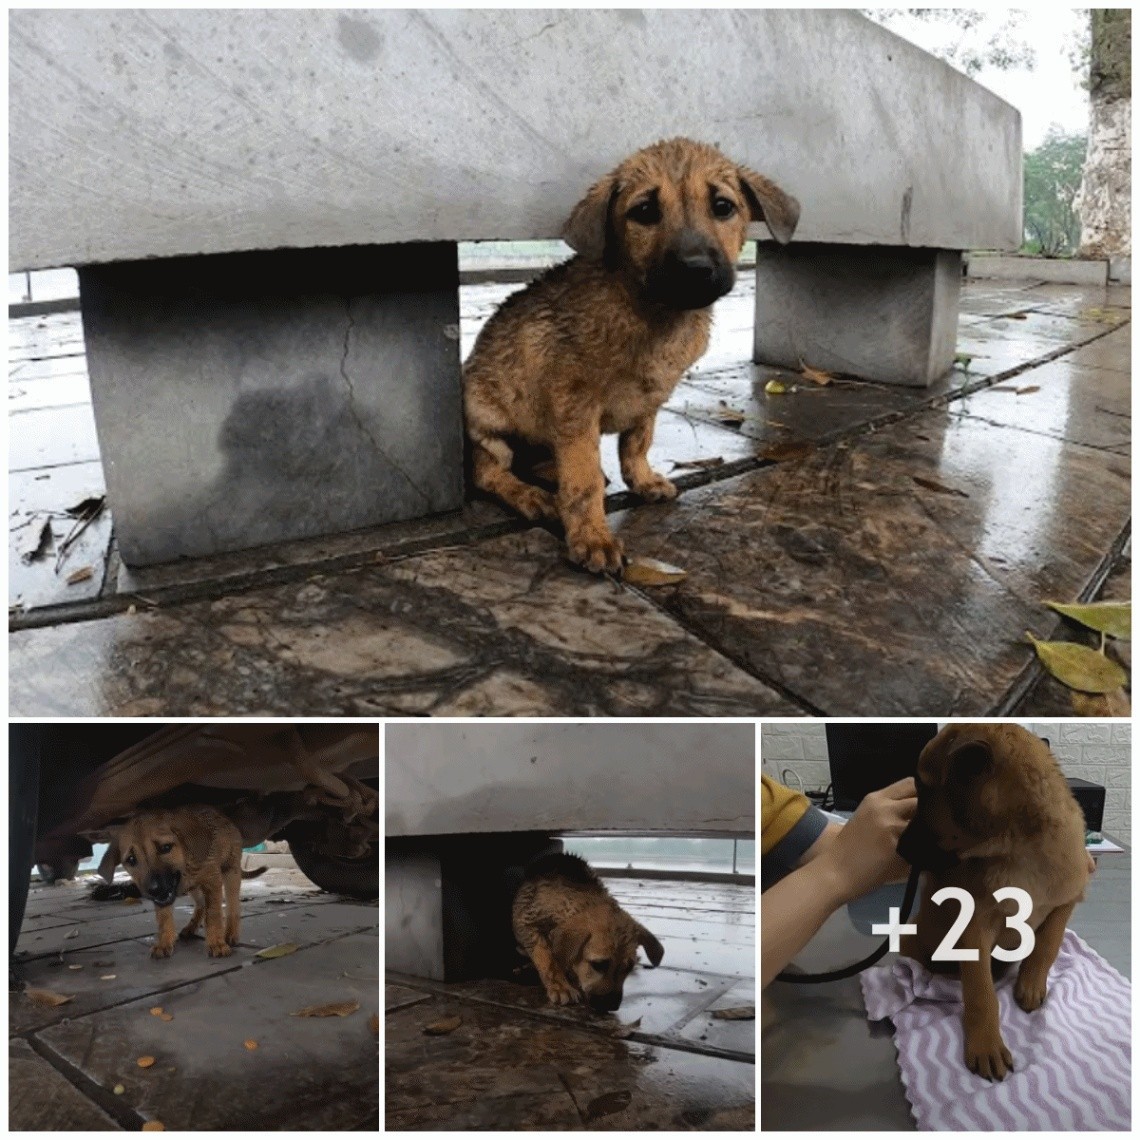 This resilient little dog stayed waiting for his owner’s family in the rain and the wind, regardless of how much I wanted to comfort him.